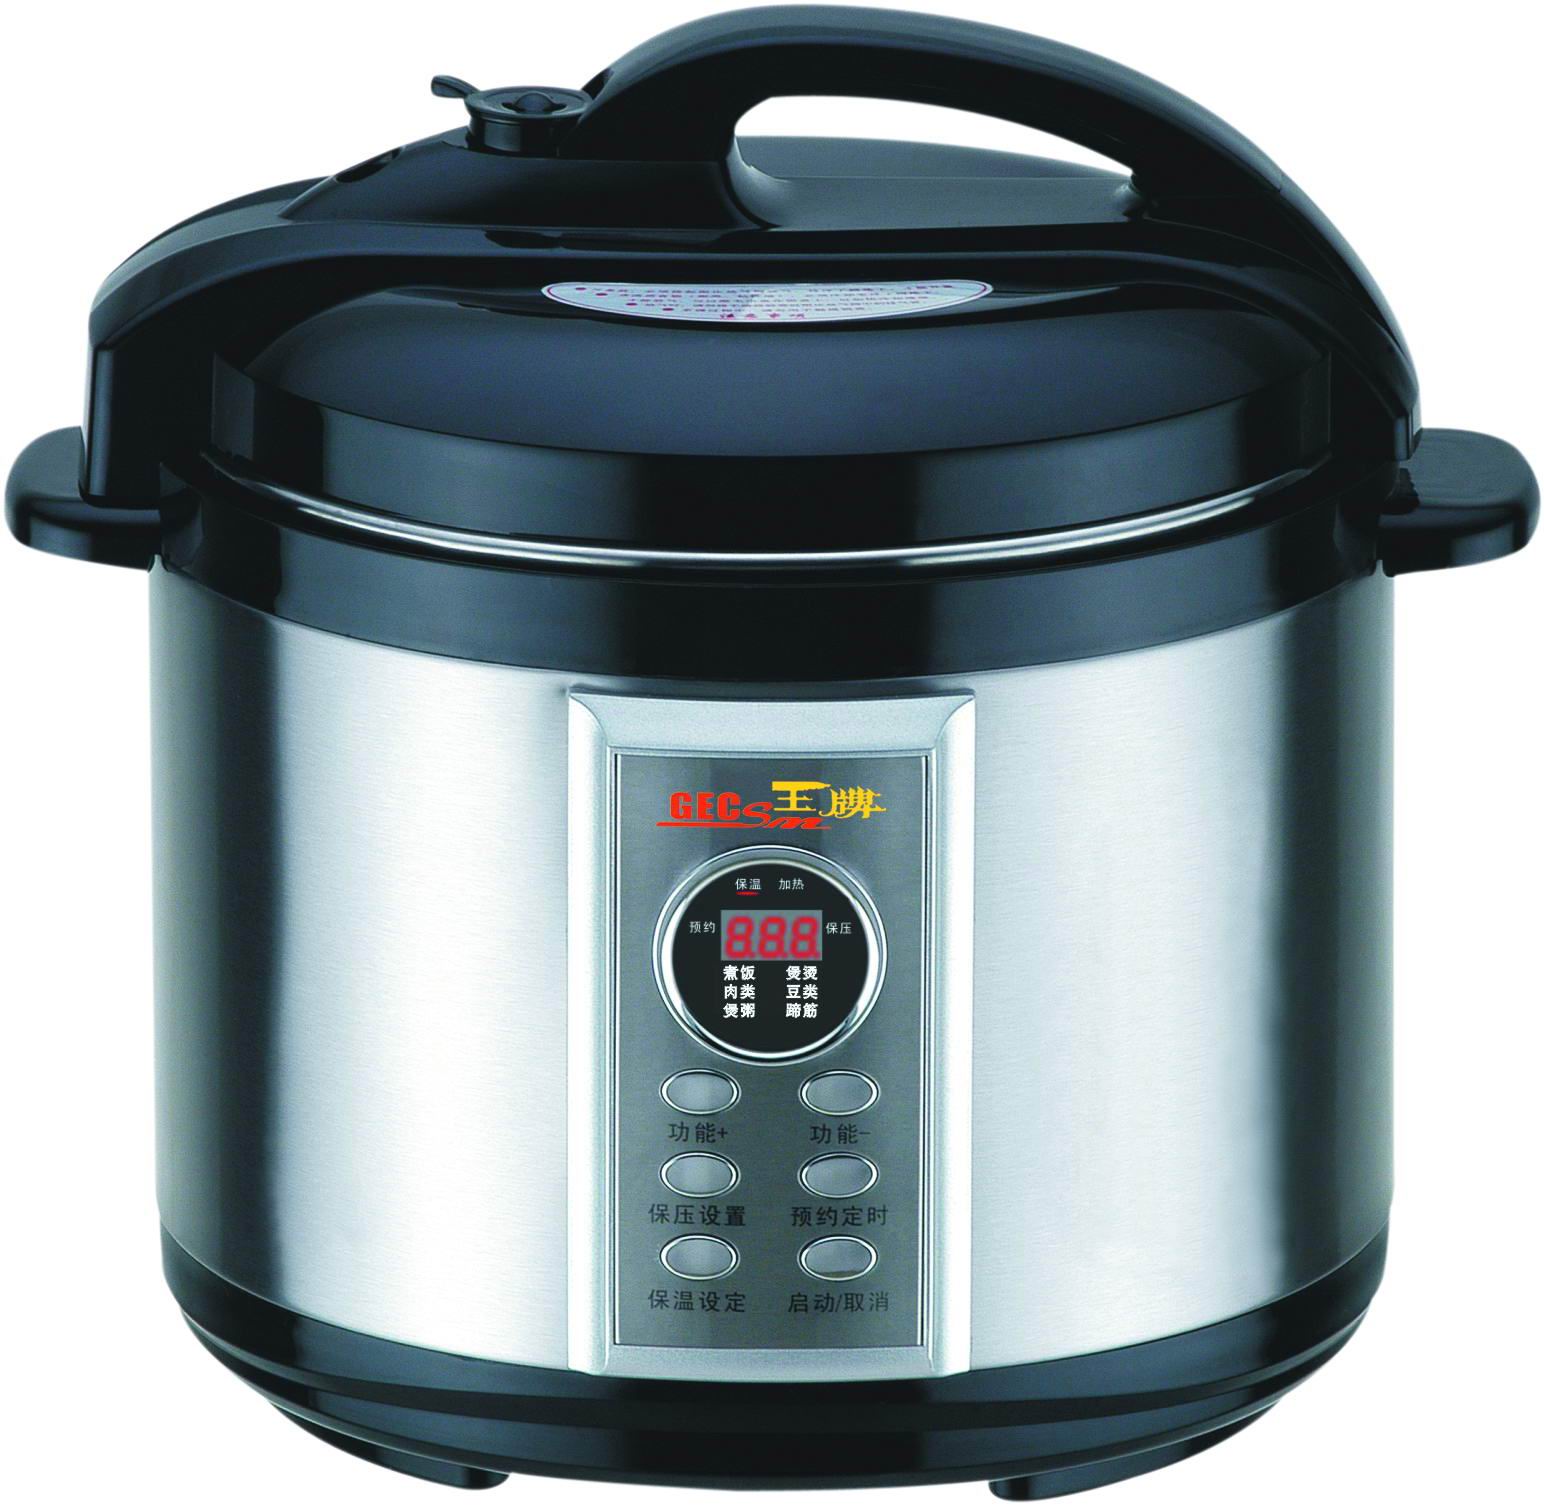 rice cooker, AILIPU, GEC , two brand